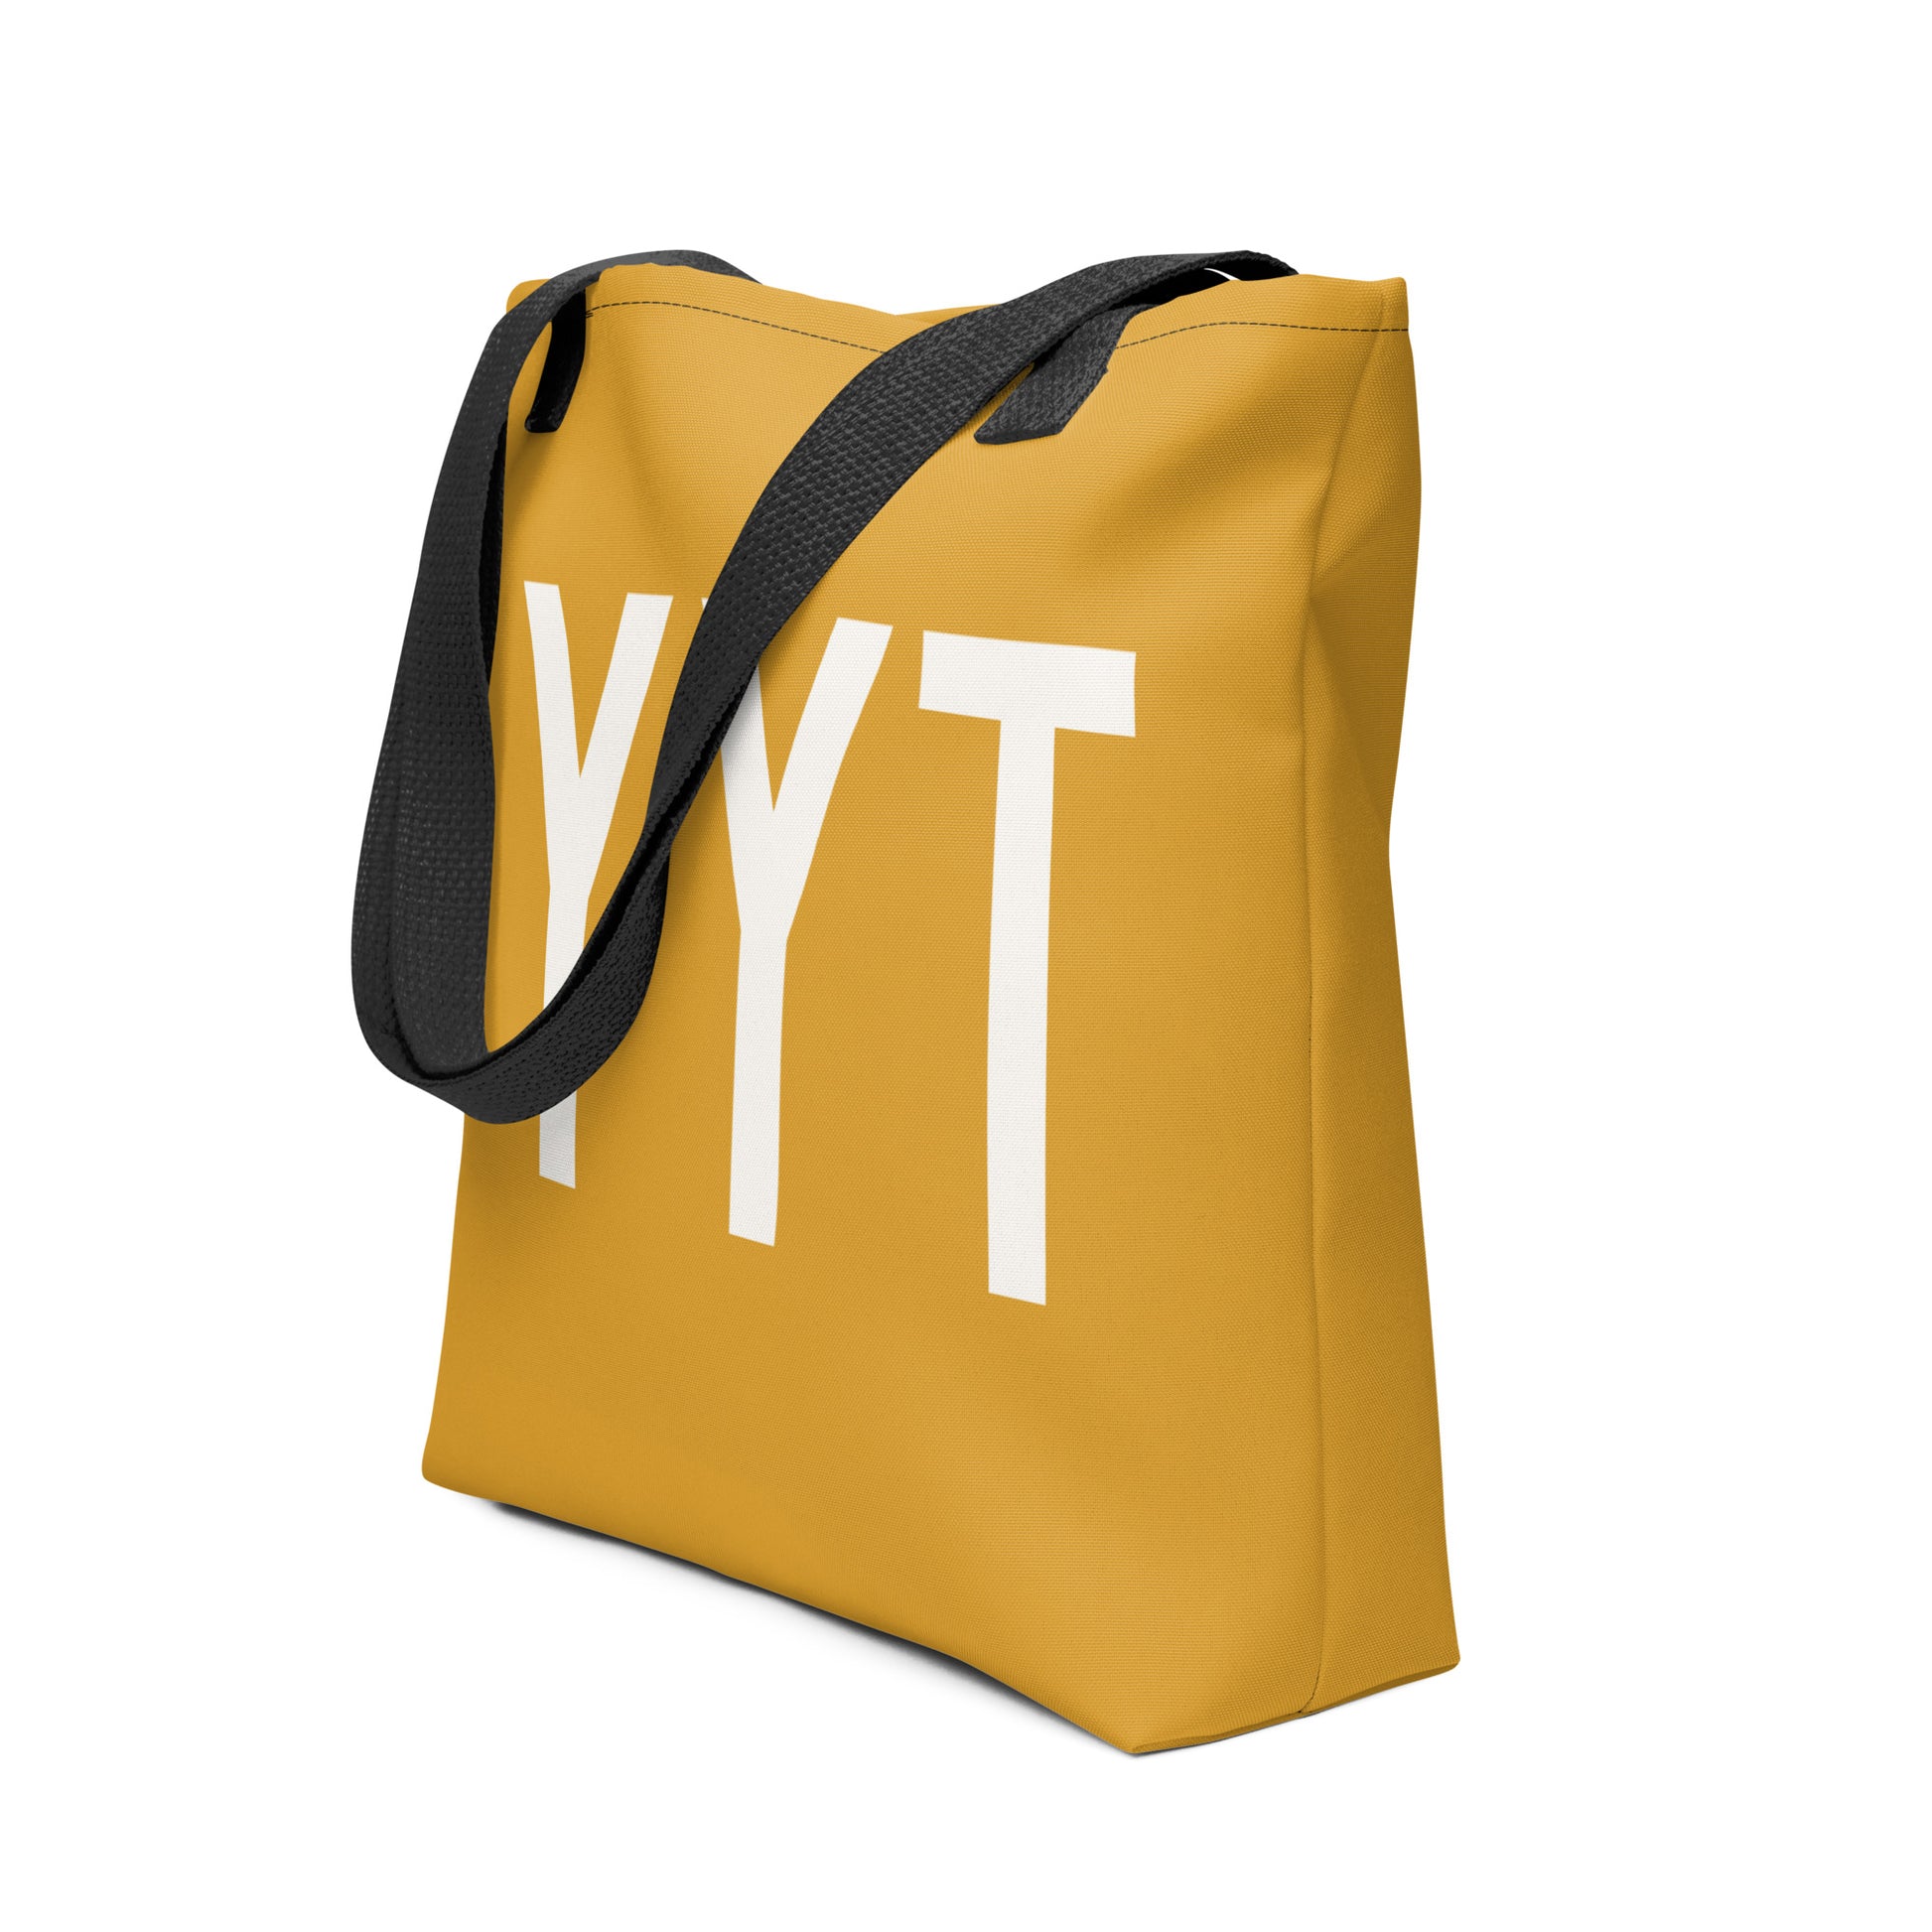 Aviation Gift Tote Bag - Buttercup • YYT St. John's • YHM Designs - Image 05